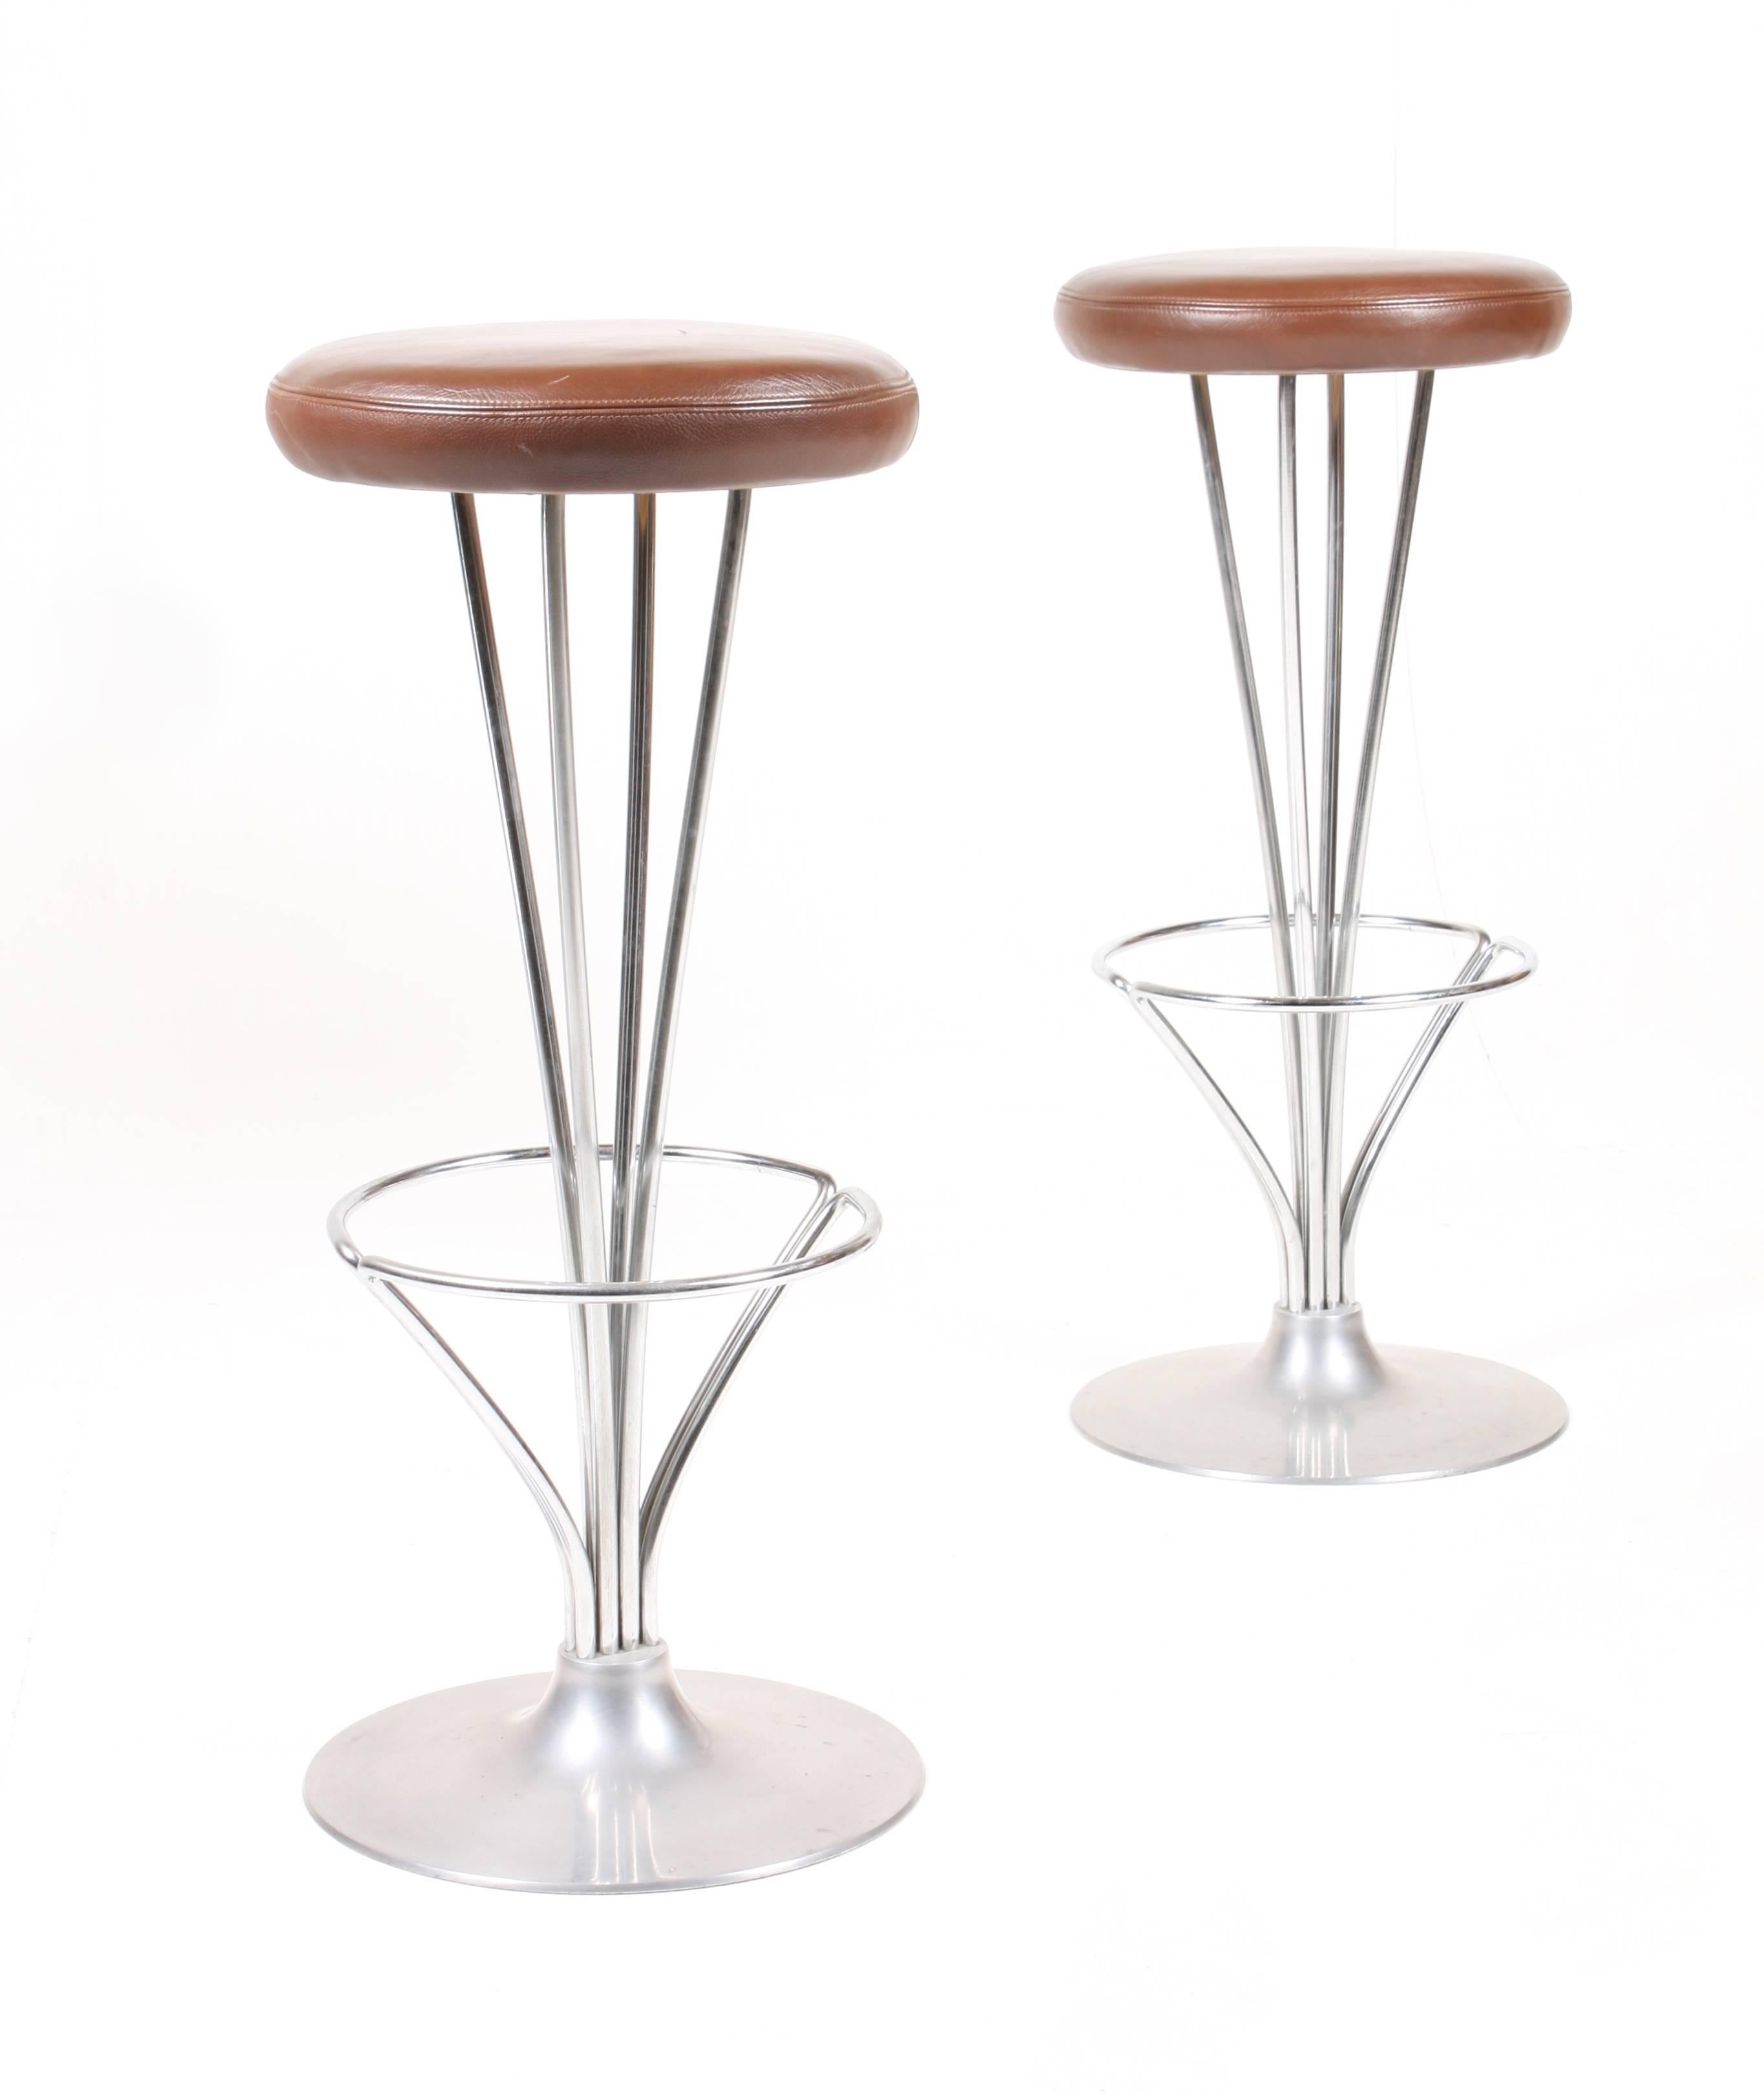 Pair of high stools in metal with patinated leather seats. Designed by Piet Hein for Fritz Hansen. Made in Denmark, great original condition. Ideal for the kitchen or in a bar.